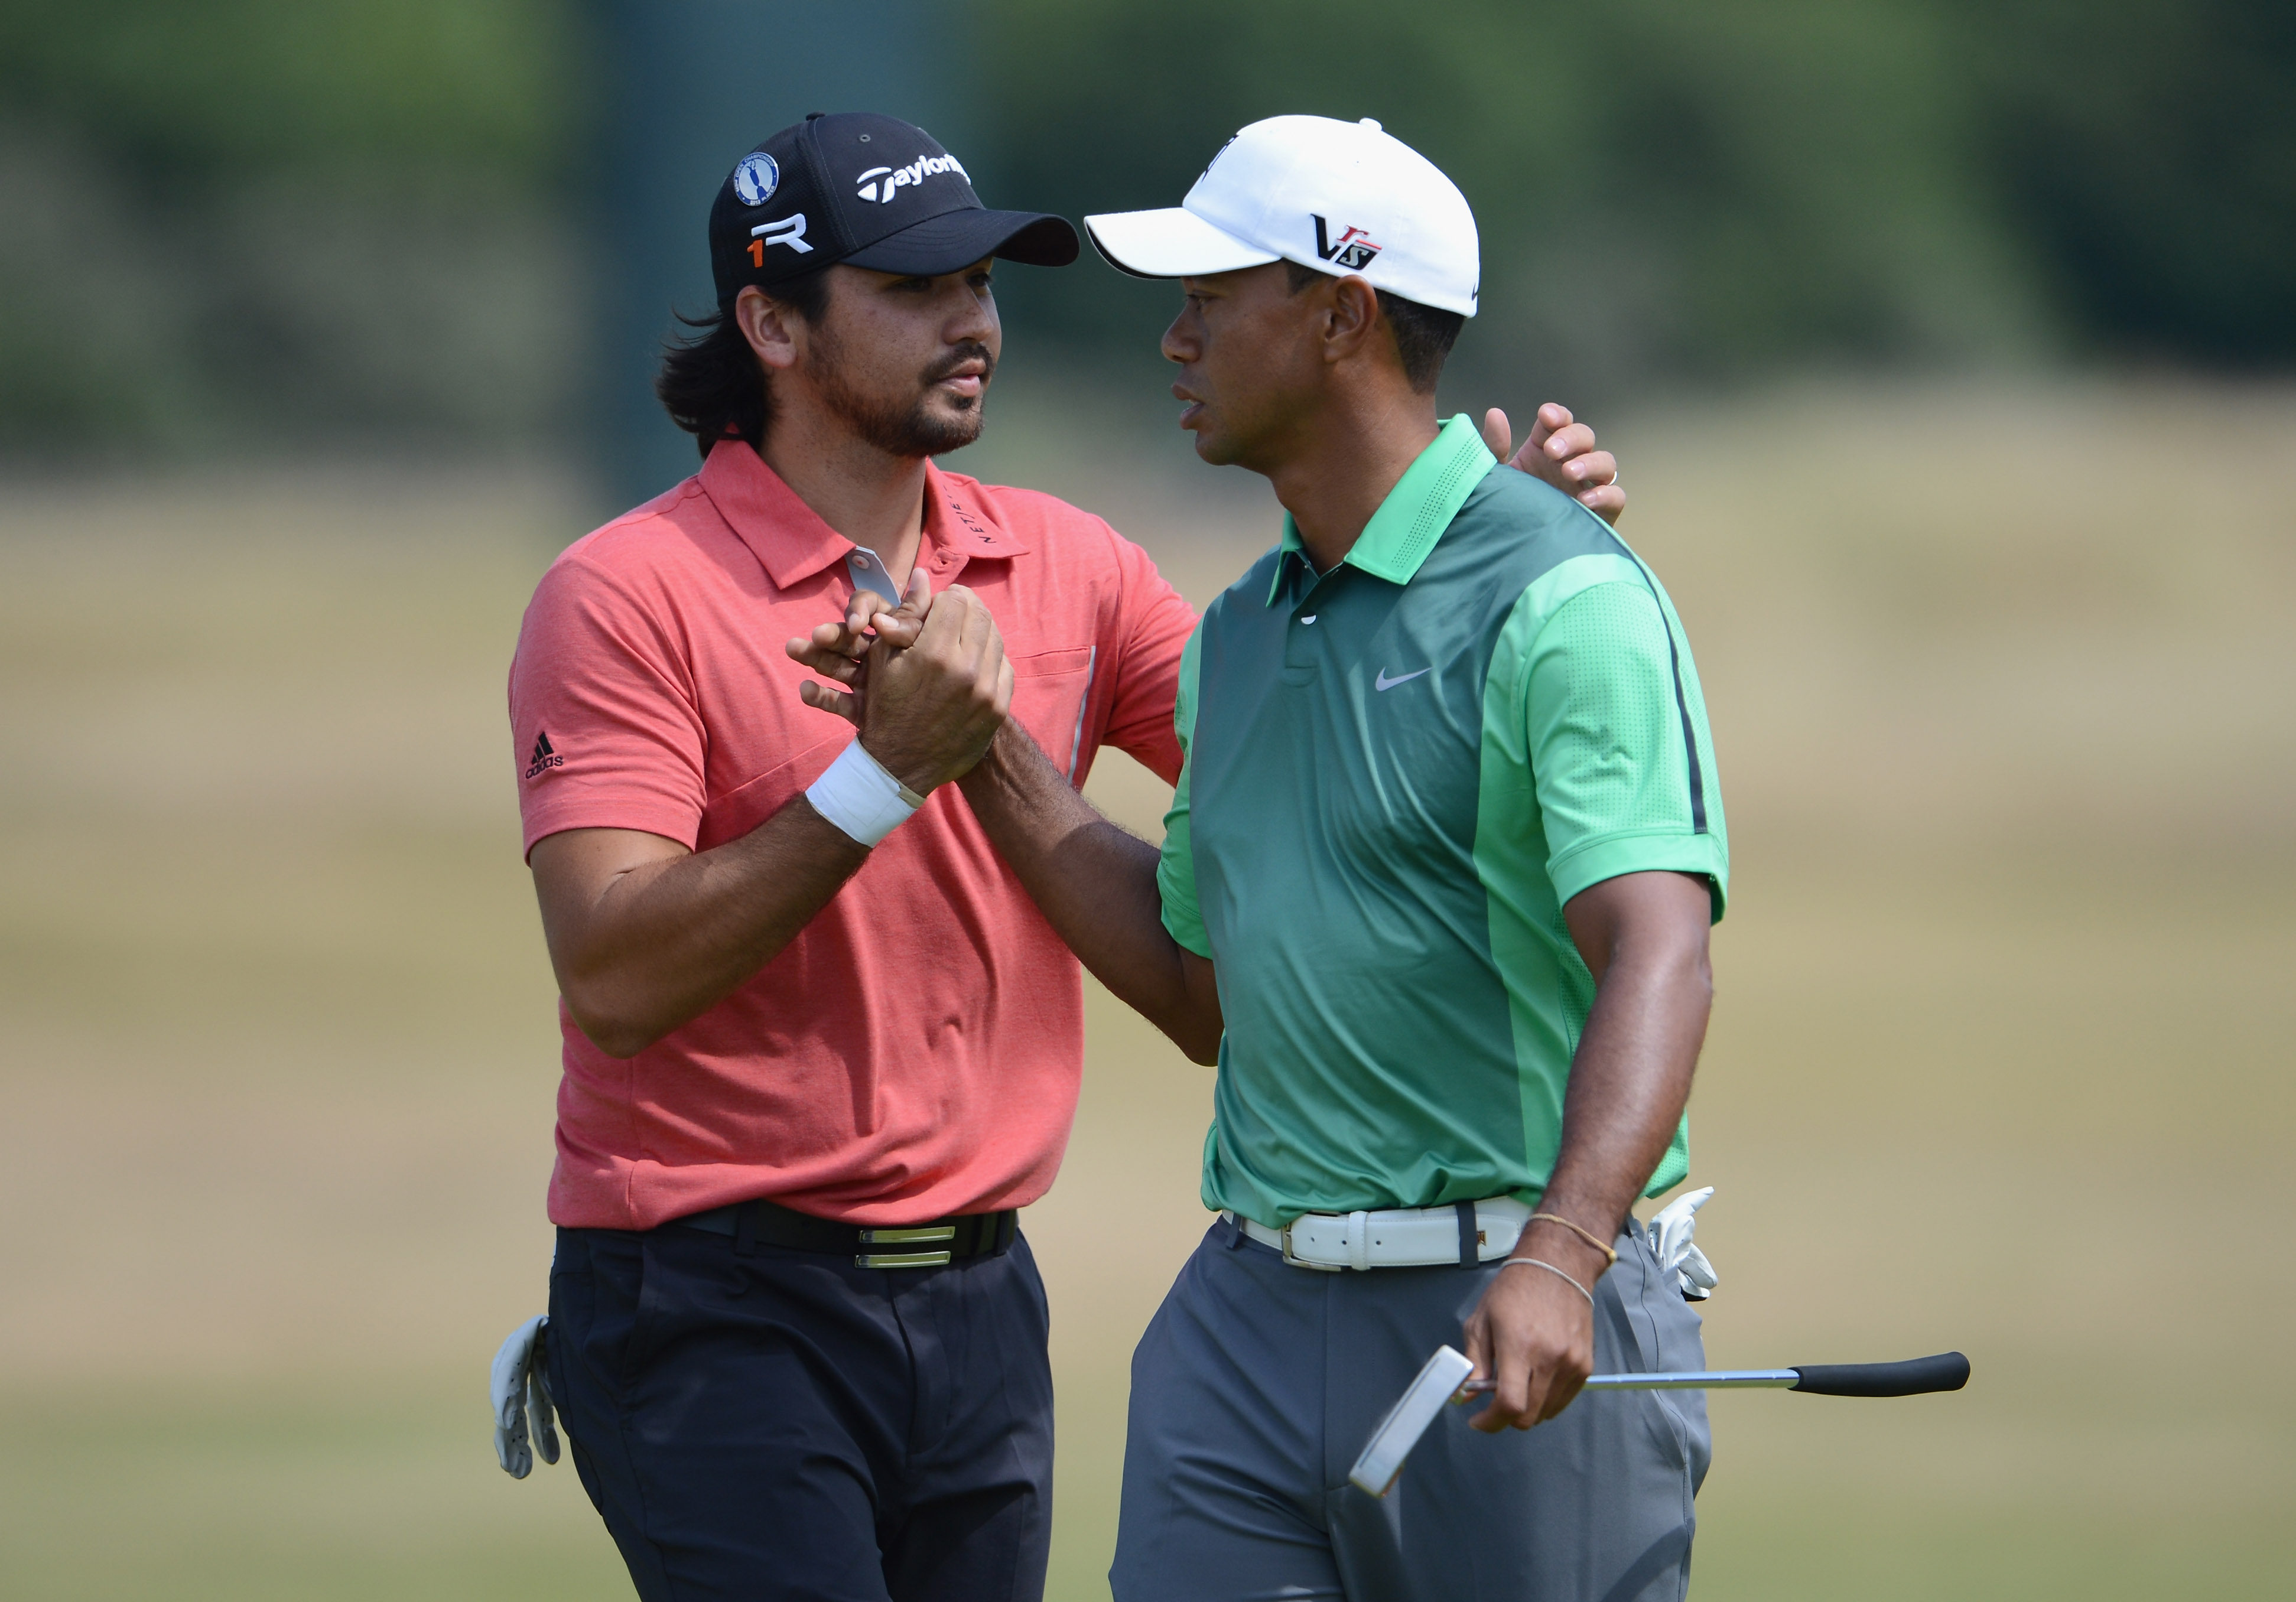 After win, Day Tiger taken him under his | kgw.com